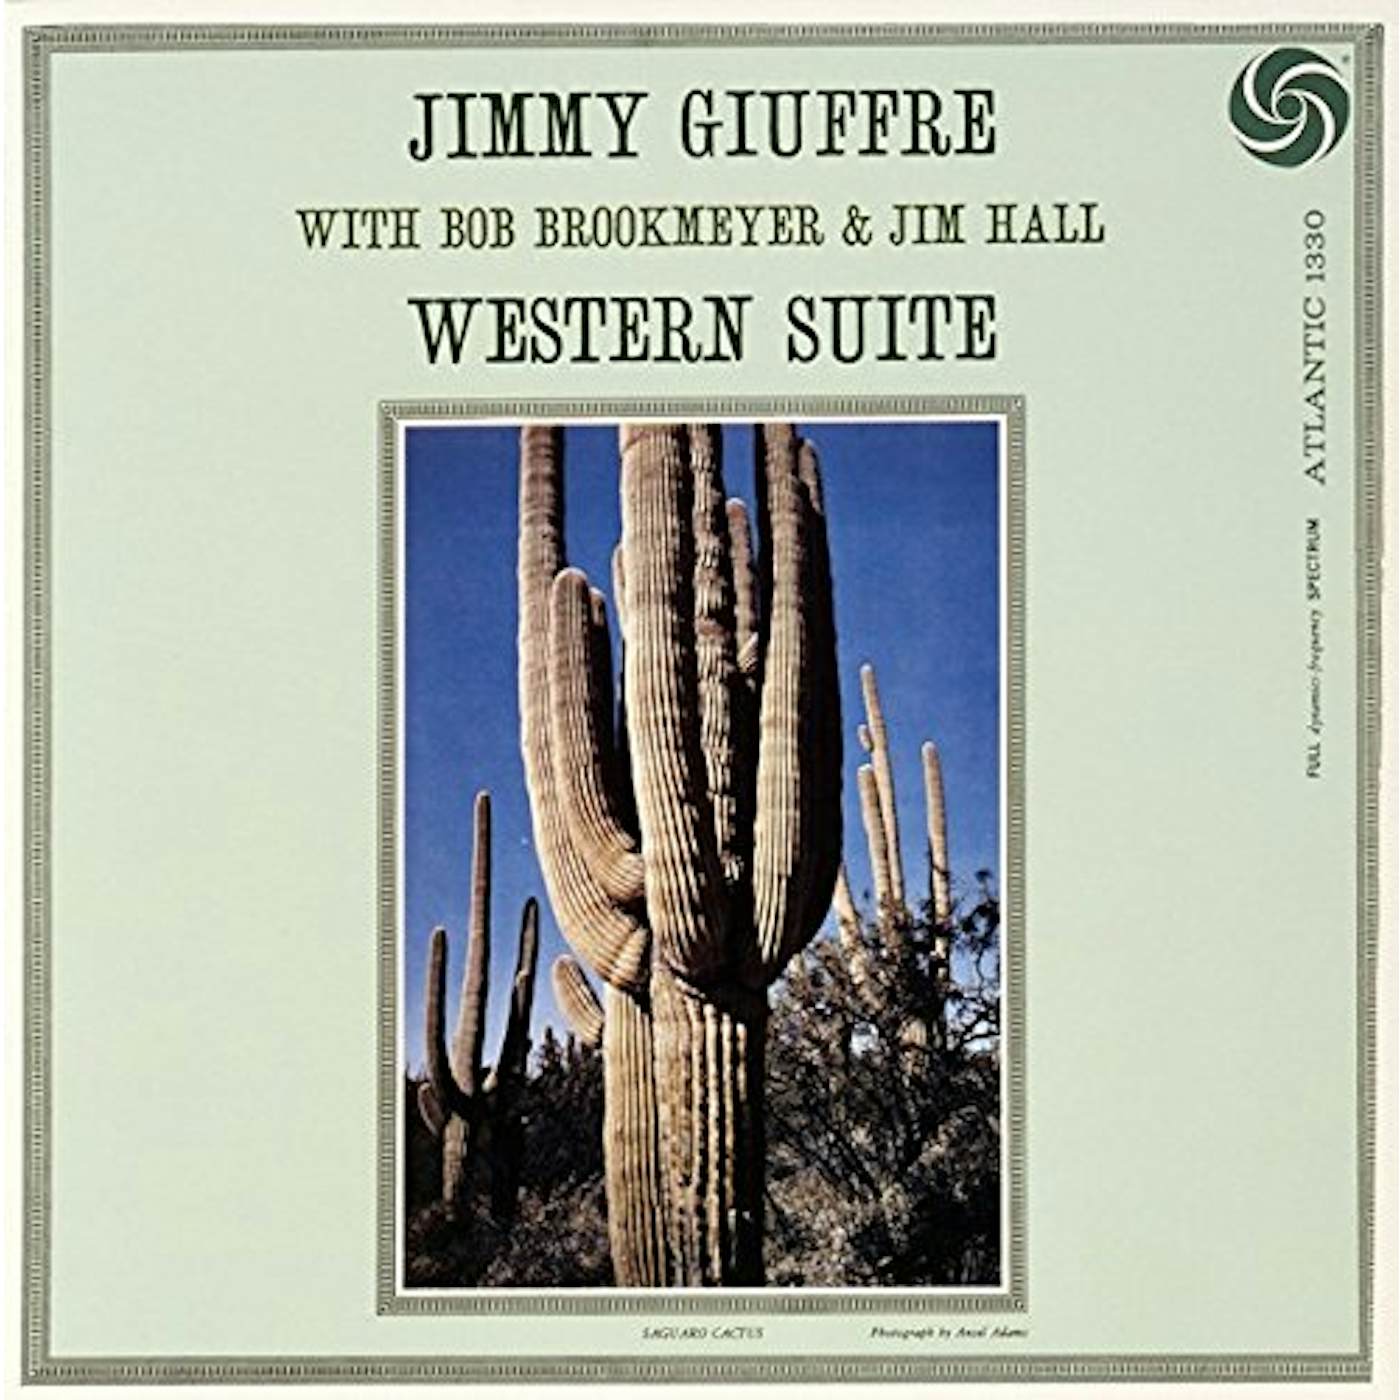 Jimmy Giuffre WESTERN SUITE CD